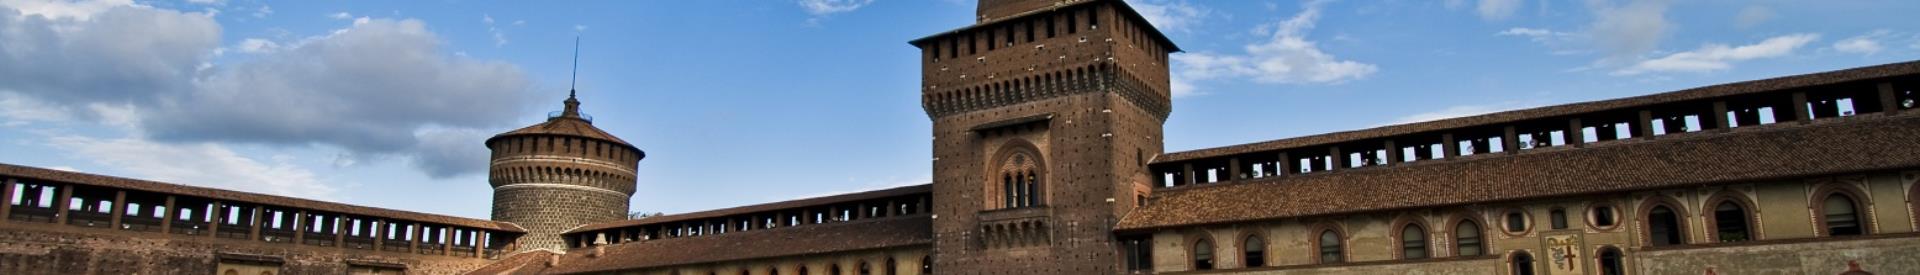 Discover Milan and its beauties: the Castello Sforzesco easy to reach from Hotel Astoria